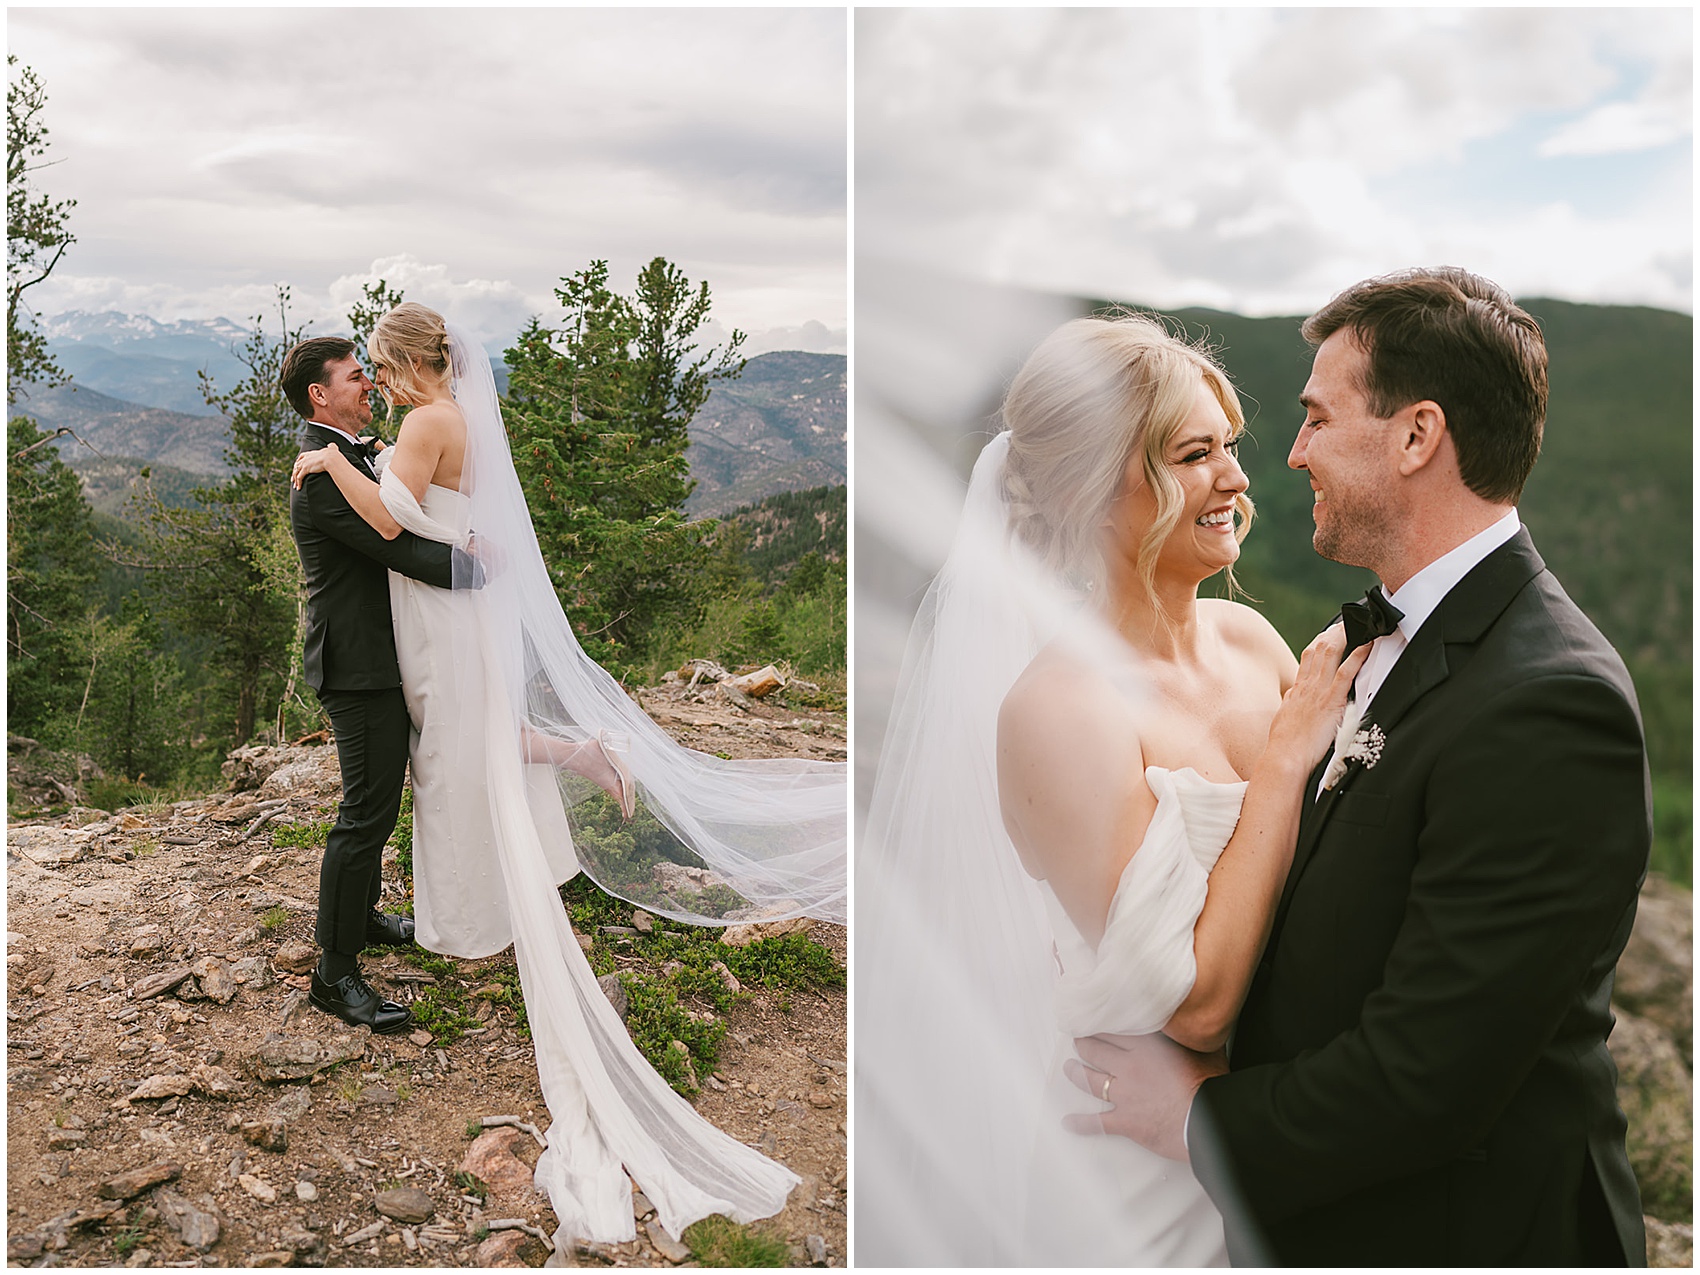 A groom laughs with his bride while lifting her on a mountain trail